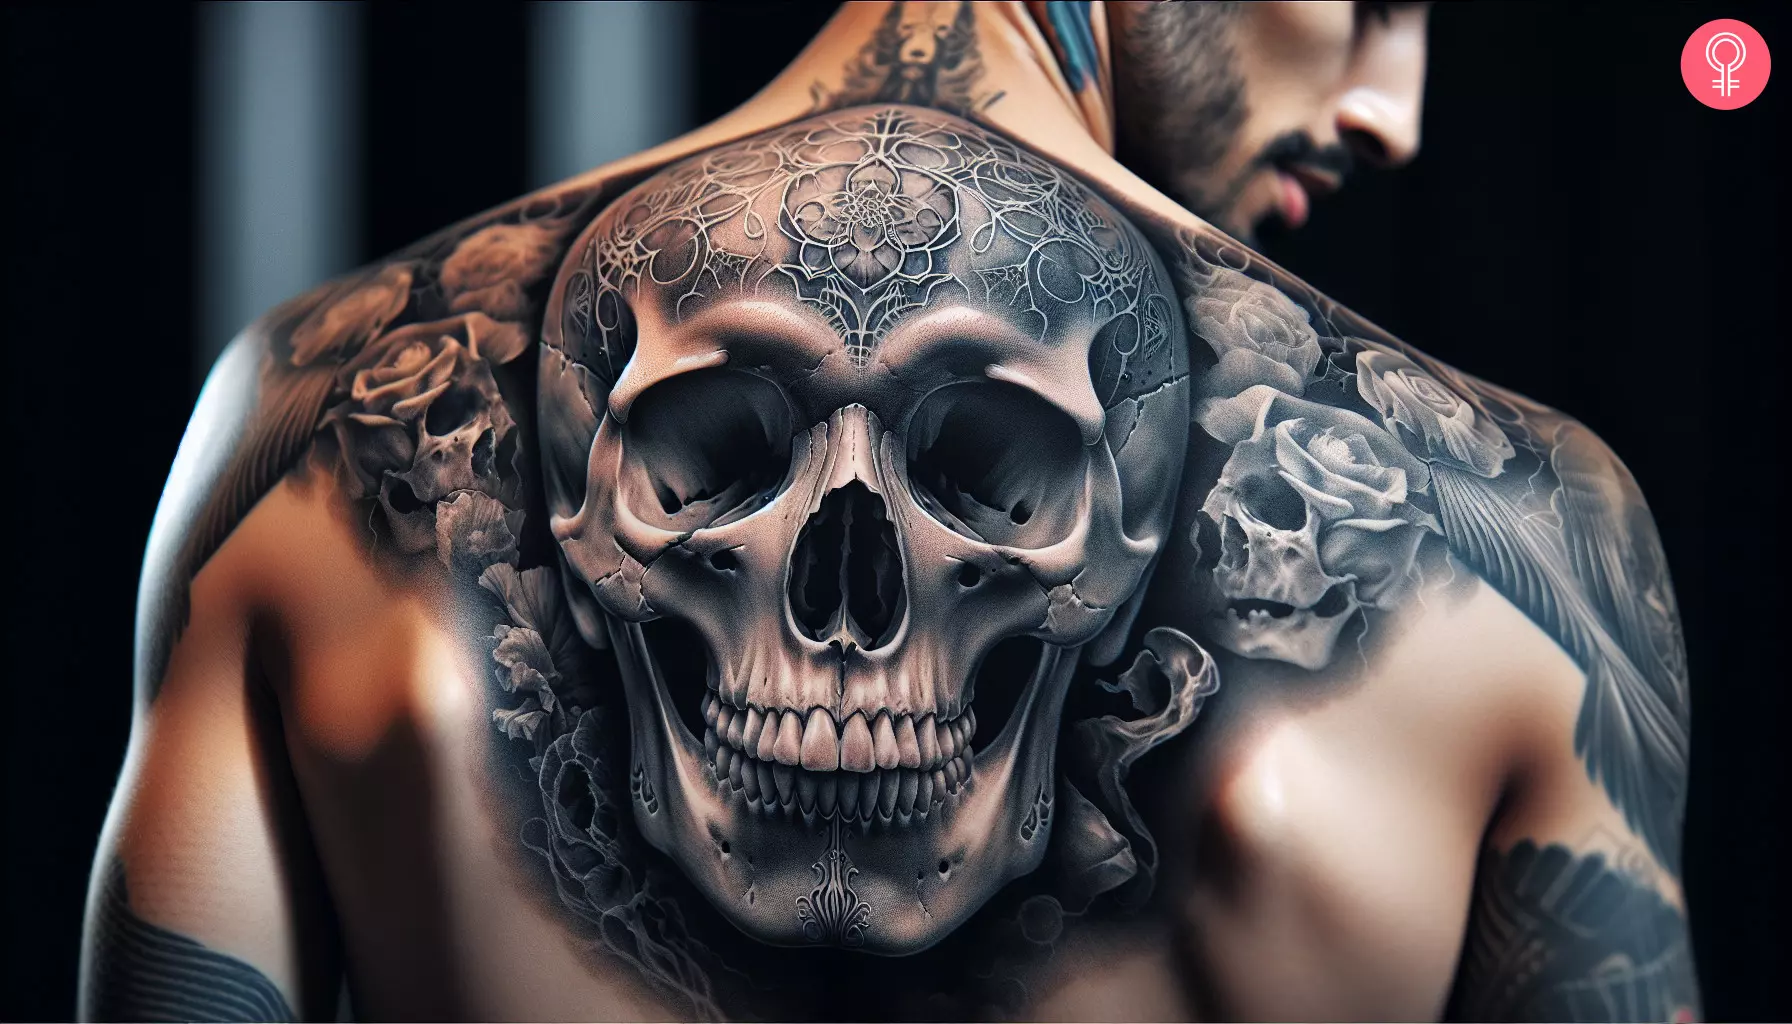 Man with realistic skull tattoo on his back